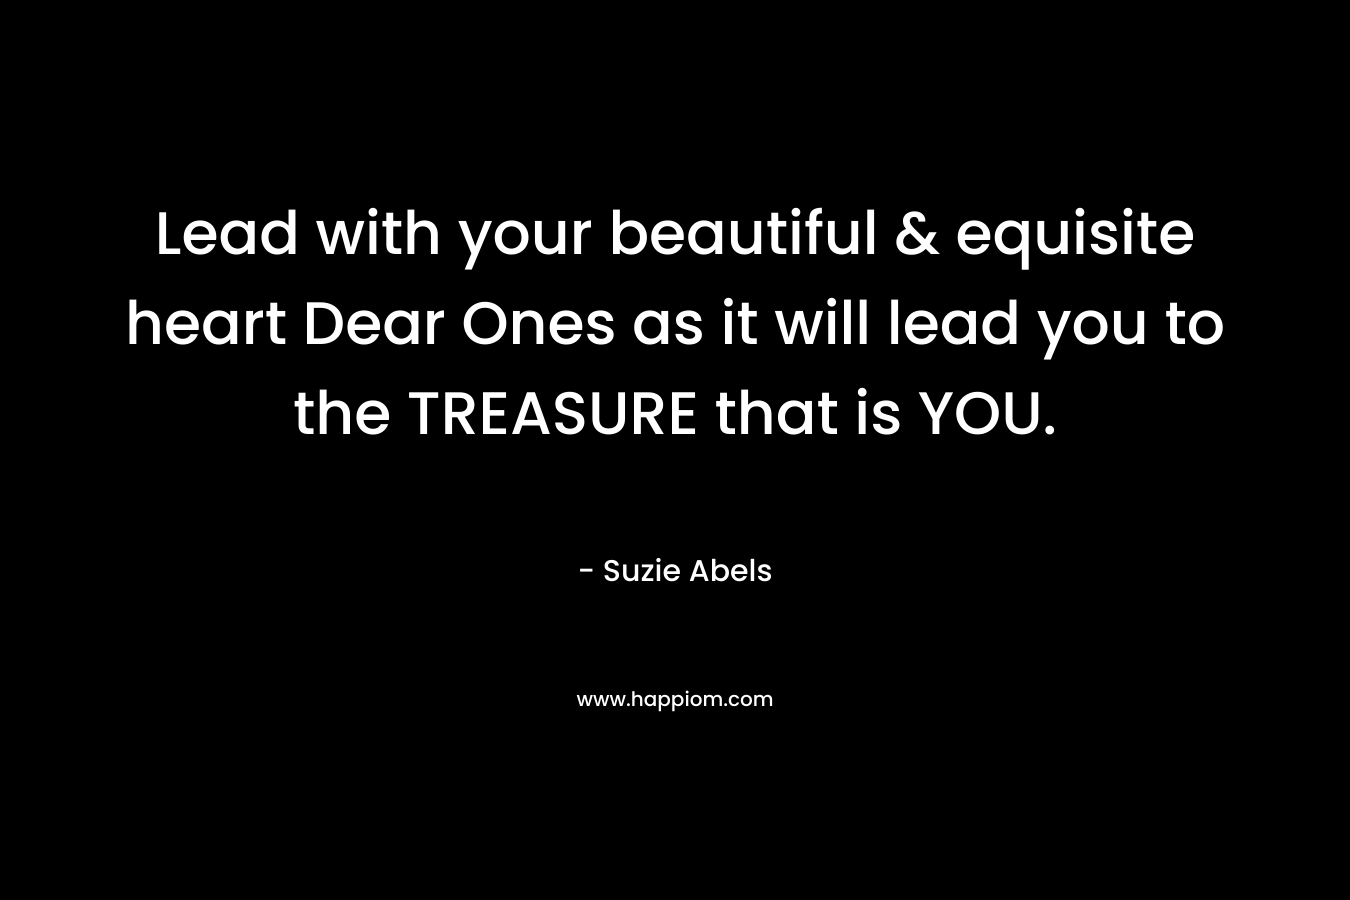 Lead with your beautiful & equisite heart Dear Ones as it will lead you to the TREASURE that is YOU.